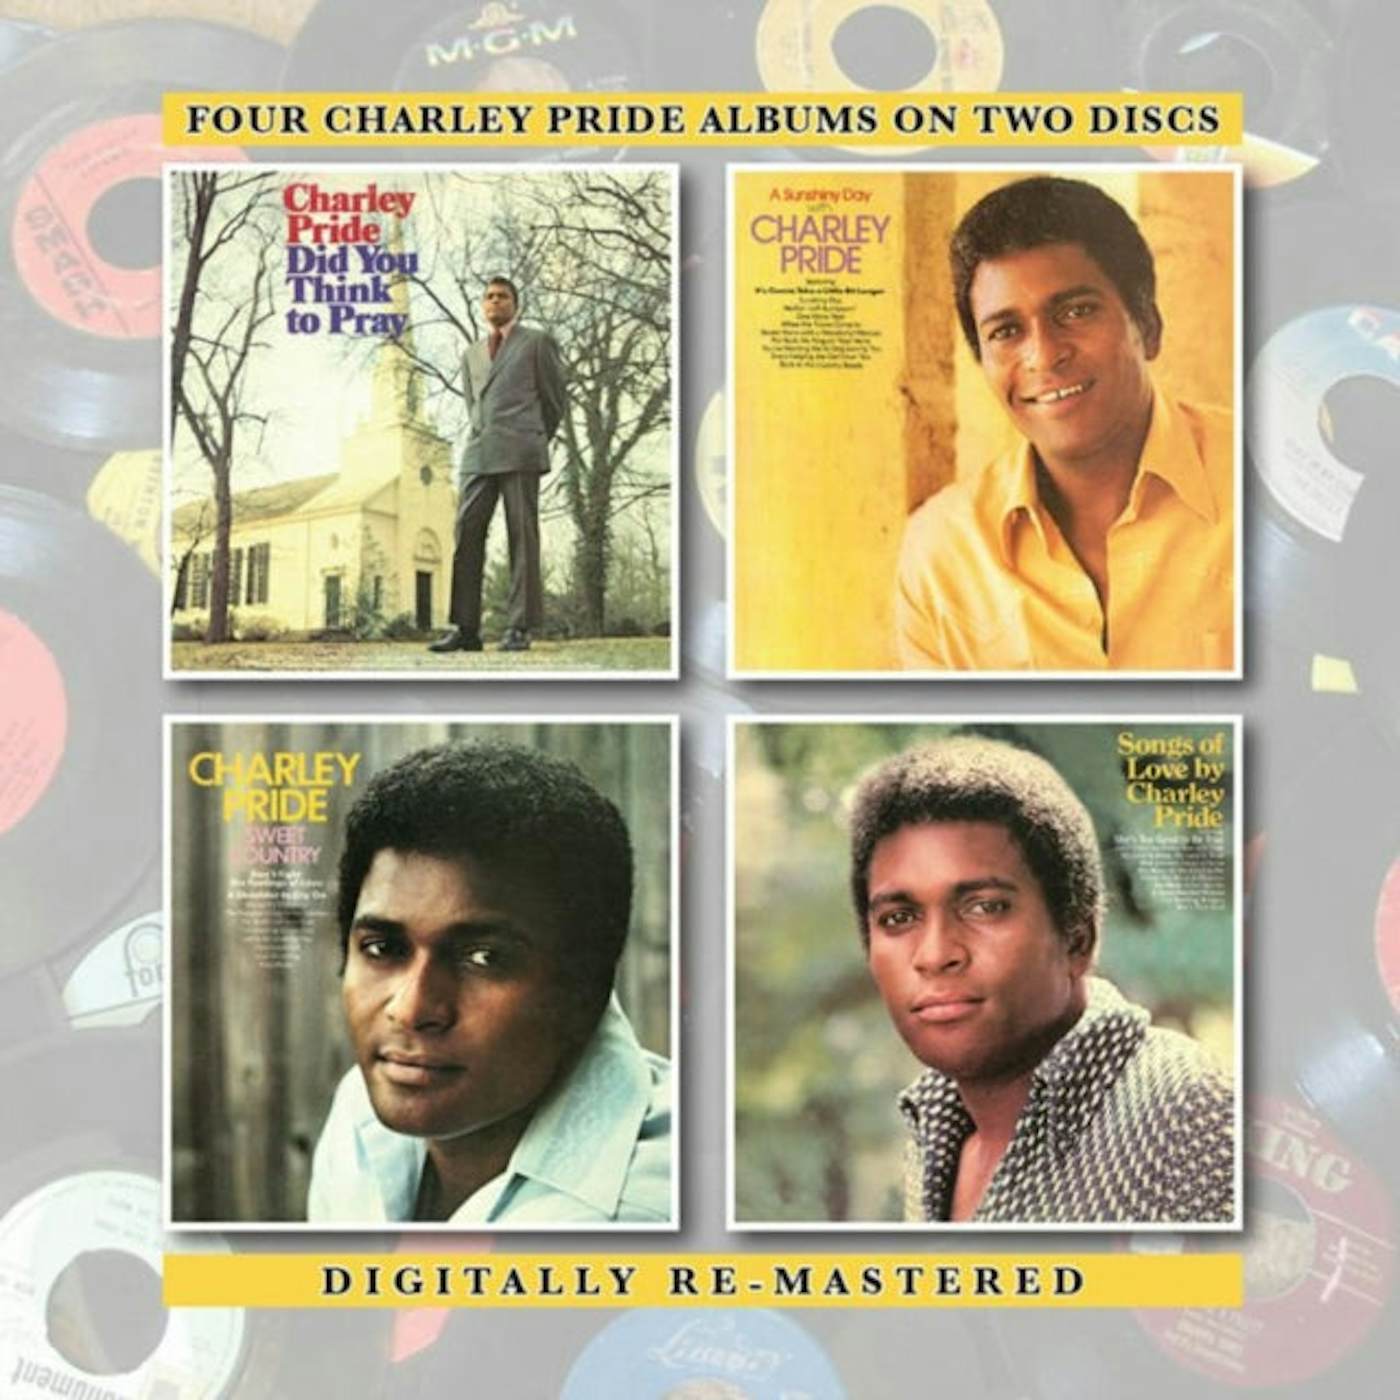 Charley Pride CD - Did You Think To Pray / A Sunshiny Day With Charley Pride / Sweet Country / Songs Of Love By Charley Pride